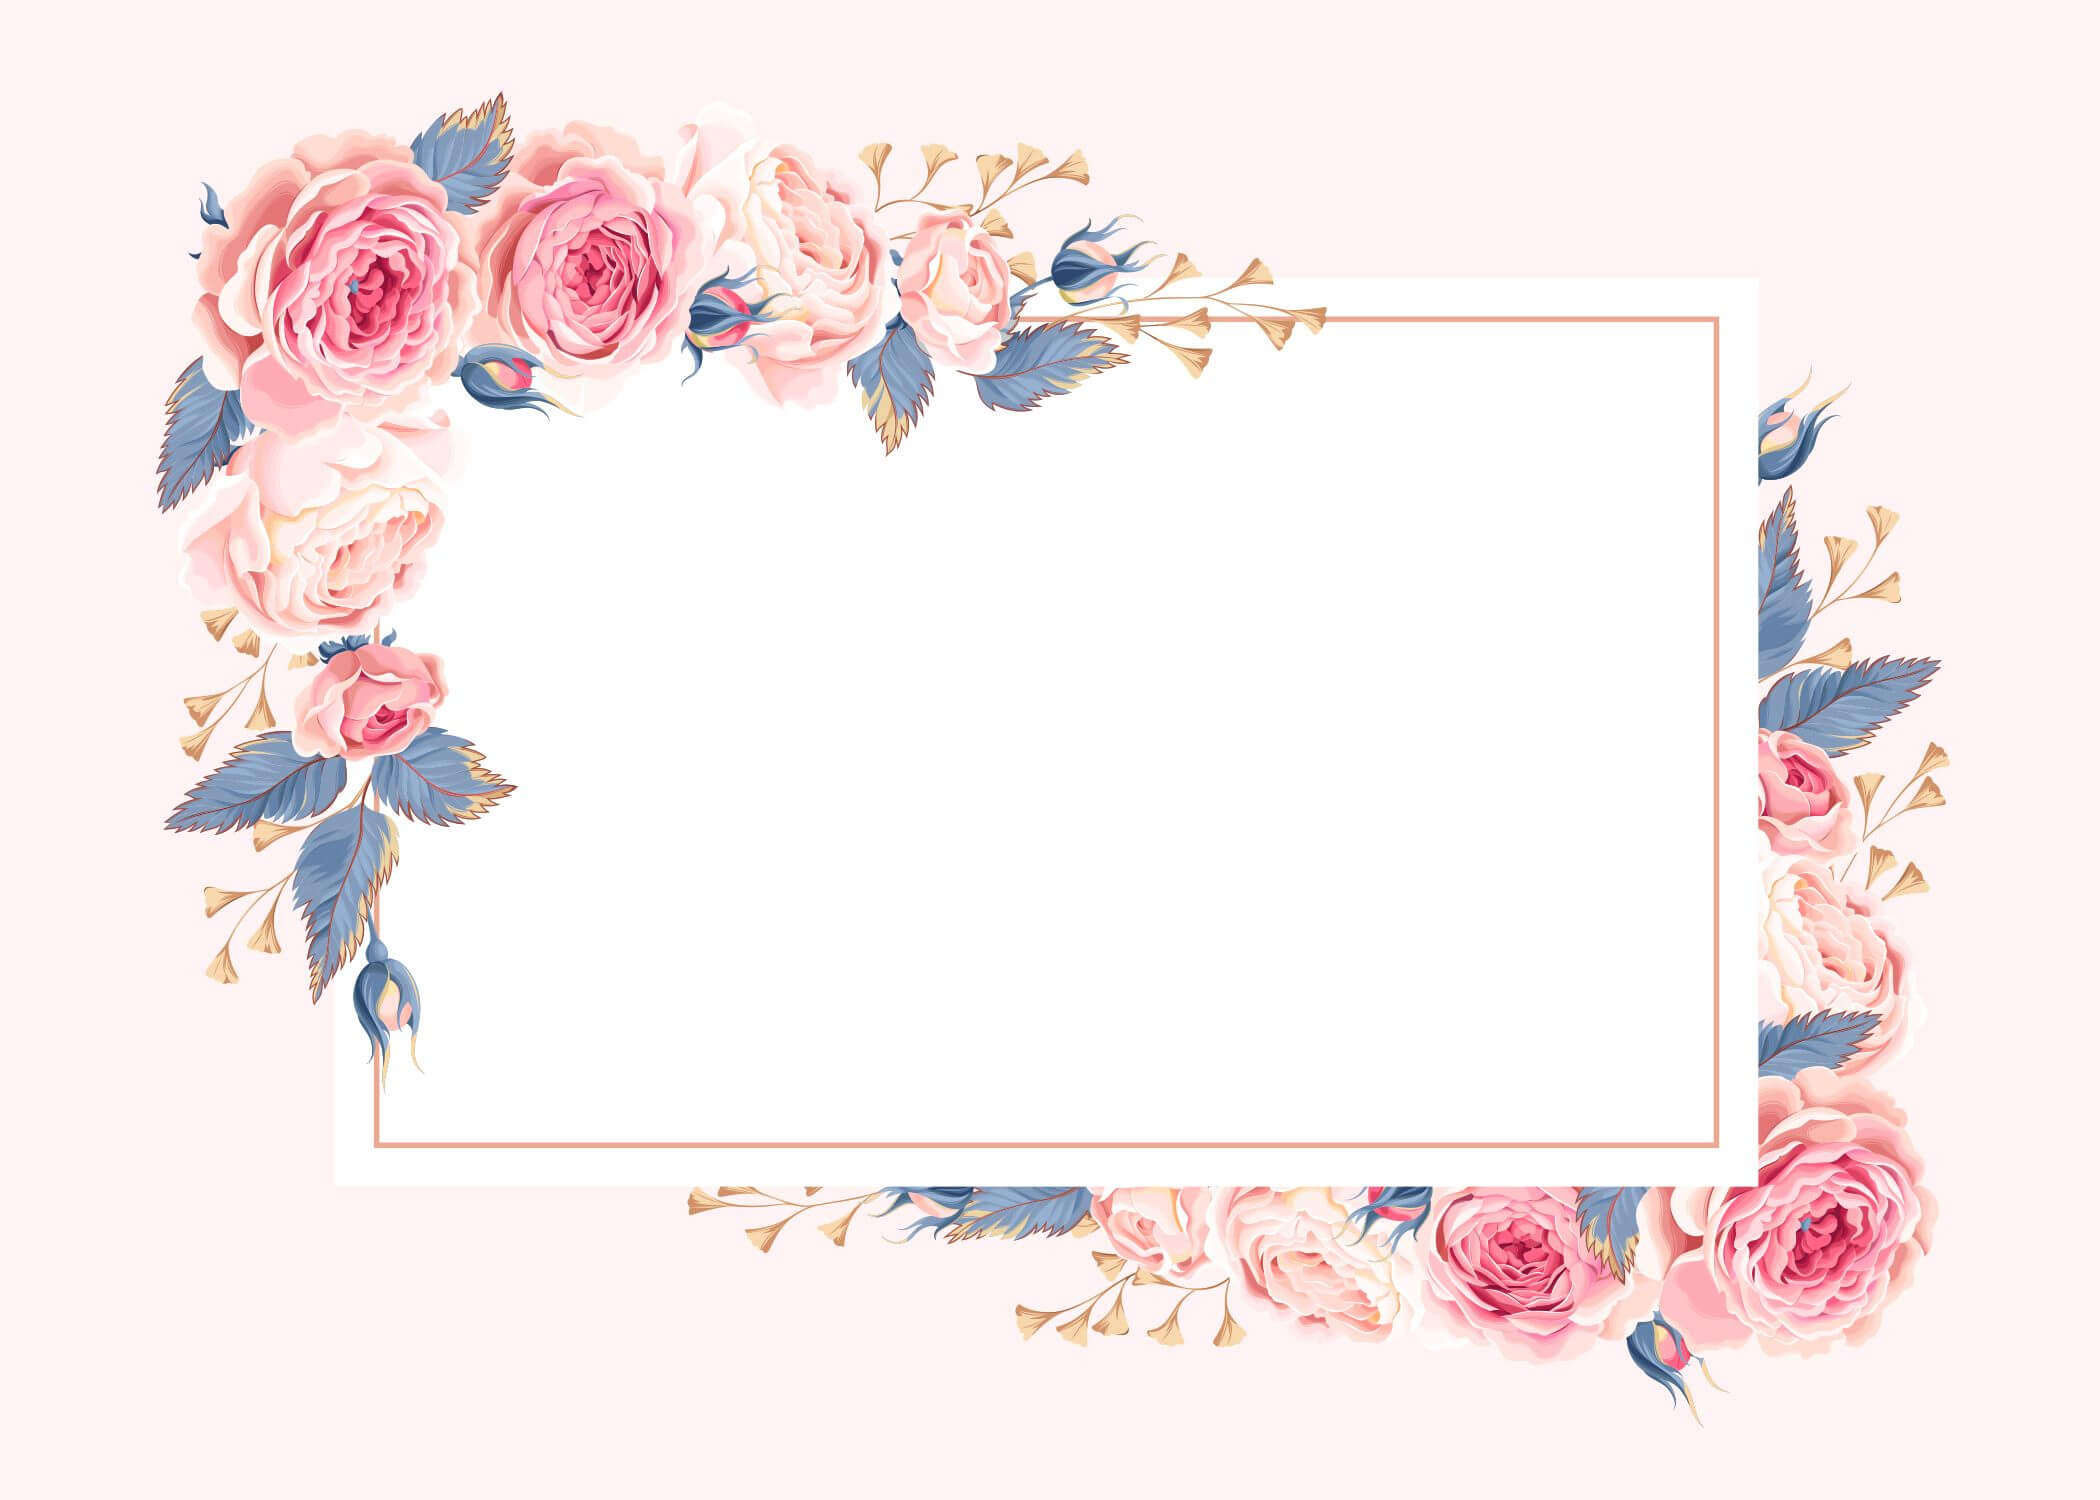 Climbing Roses – Rsvp Card Template (Free In 2020 With Regard To Free Printable Wedding Rsvp Card Templates